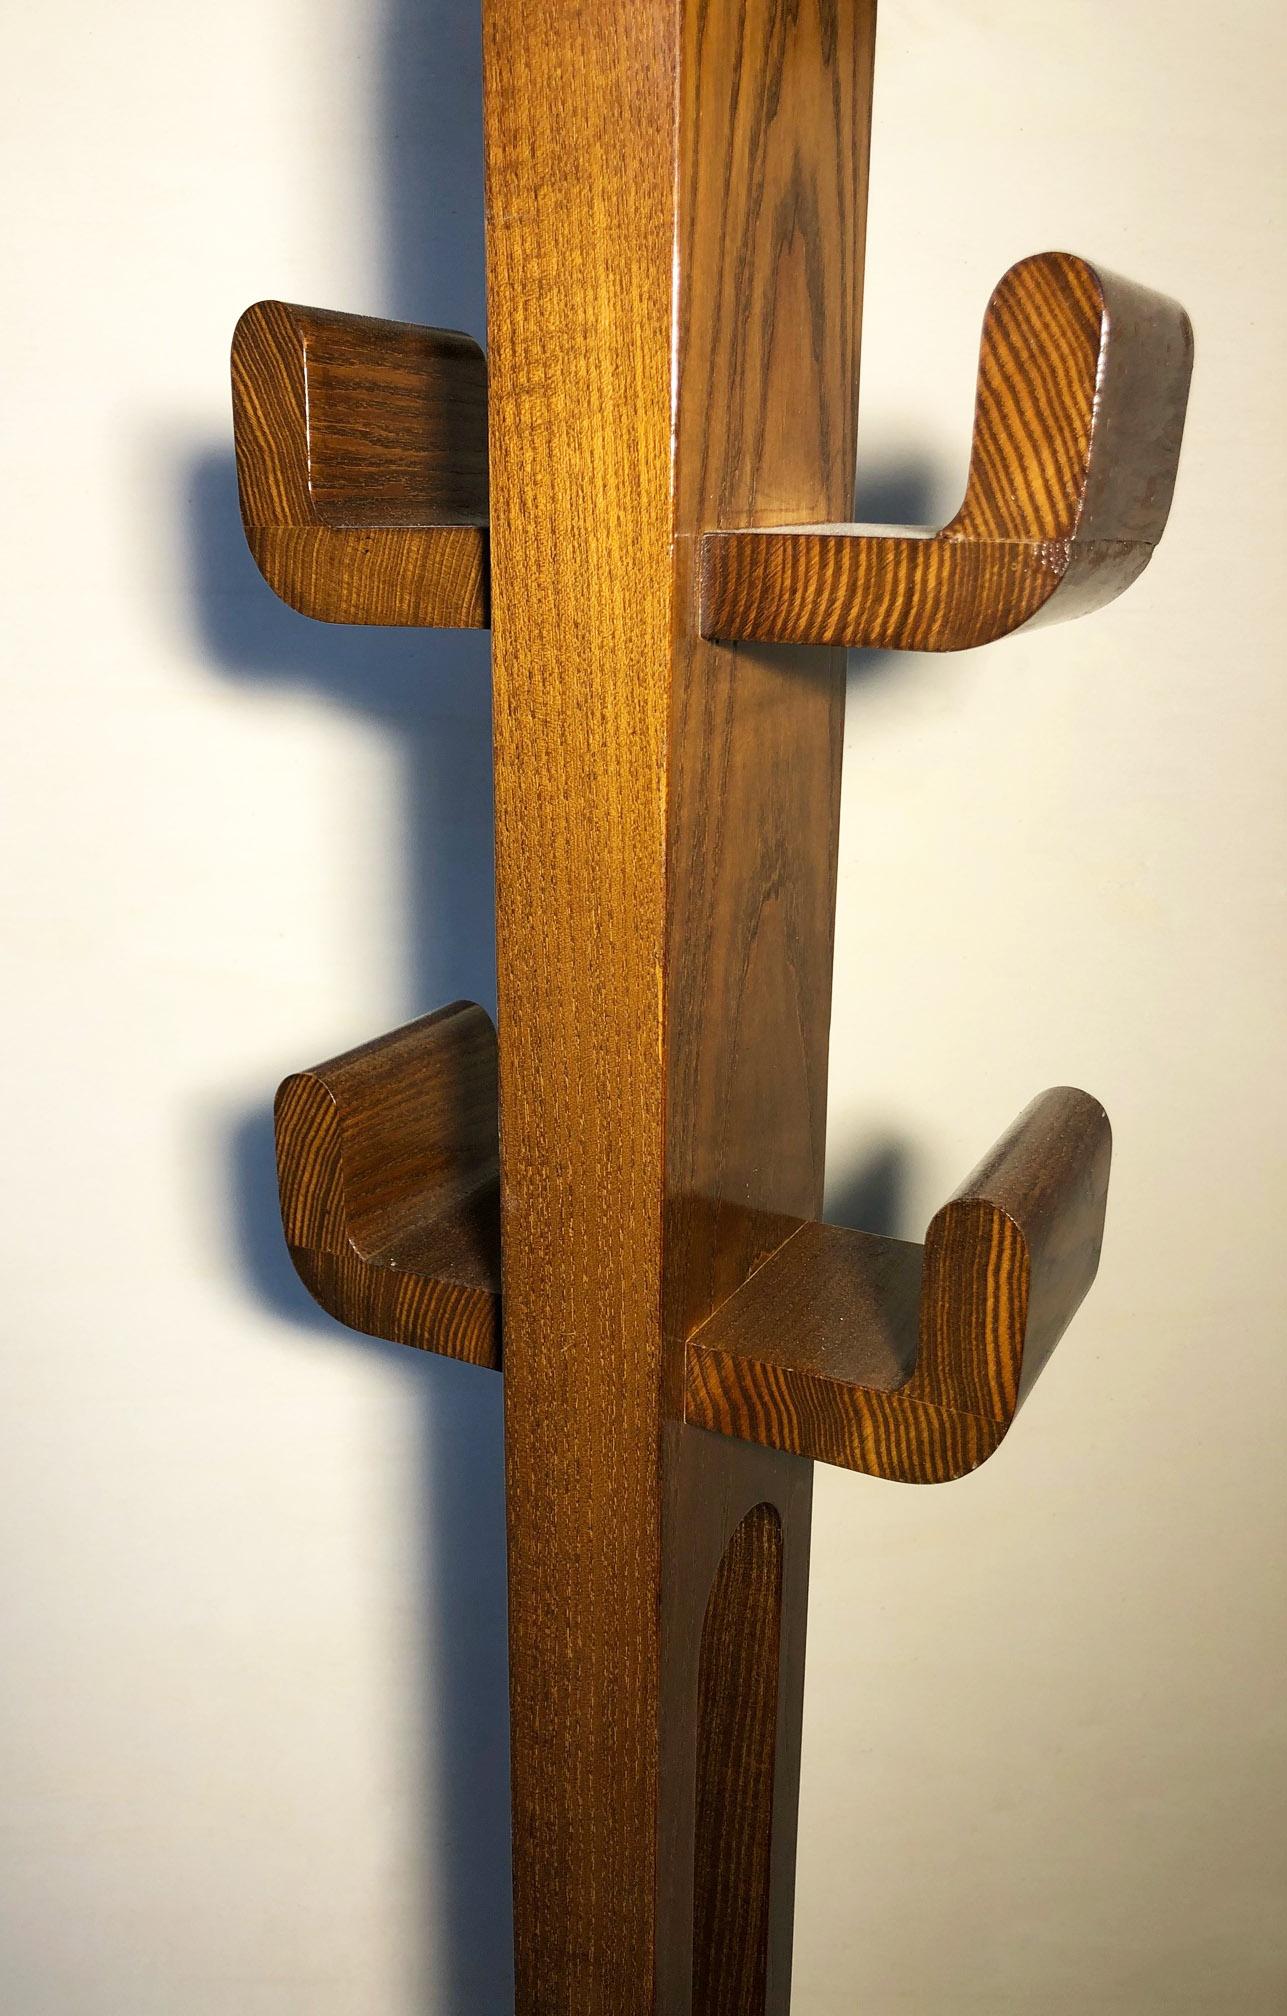 Original 1970s Italian coat rack in chestnut, cactus design.

To find out the cost of transport to USA etc write a message indicating the delivery city.